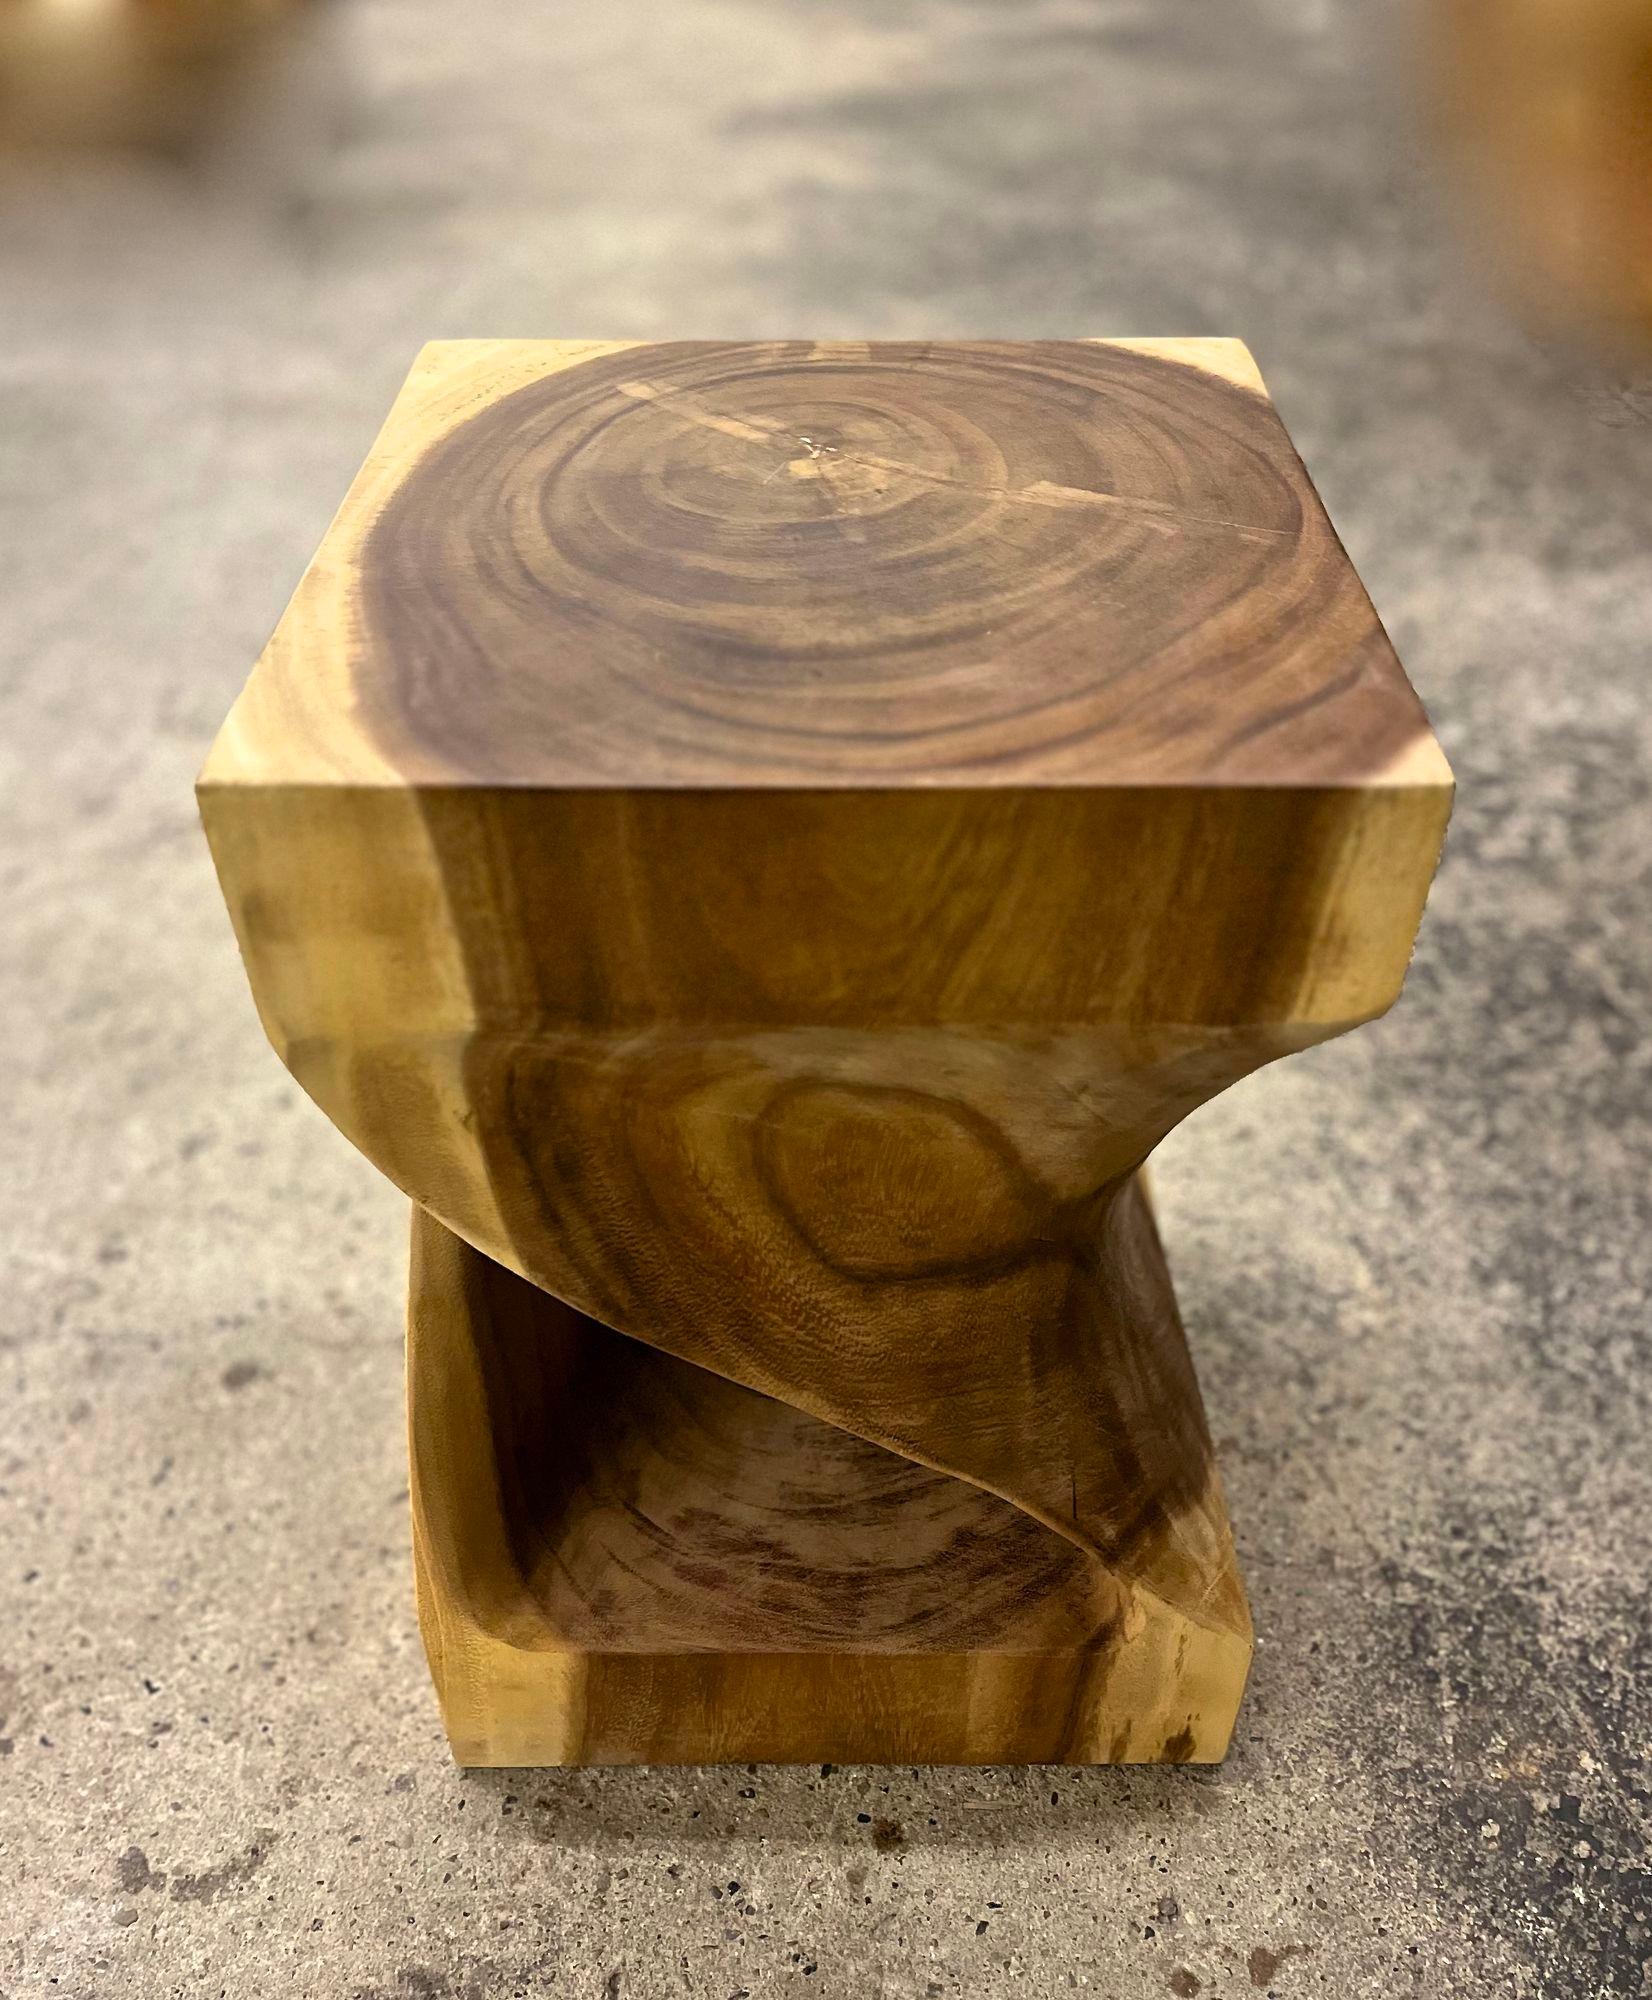 Extraordinary Suar wood side table or stool, artfully handcrafted by a very talented indonesian artist. This organic modern side table/ stool impresses with its beautiful twisted, open worked design which has been elaborately worked out of one big